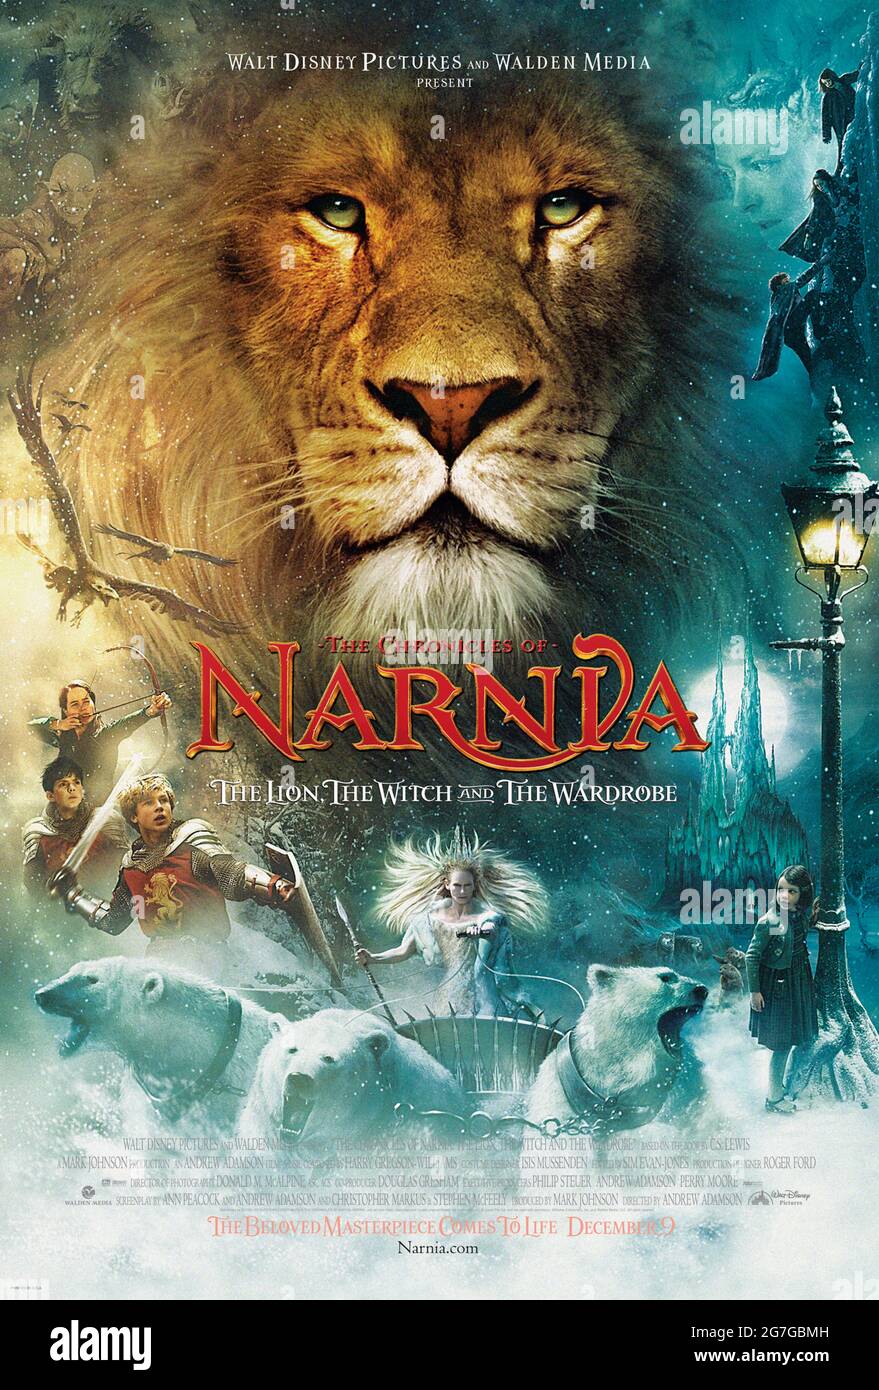 The Chronicles of Narnia: The Lion, the Witch and the Wardrobe (2005) directed by Andrew Adamson and starring Tilda Swinton, Georgie Henley, William Moseley and James McAvoy. Big screen adaptation of C.S. Lewis' classic story about 4 children who travel through a wardrobe to the magical land of Narnia. Stock Photo